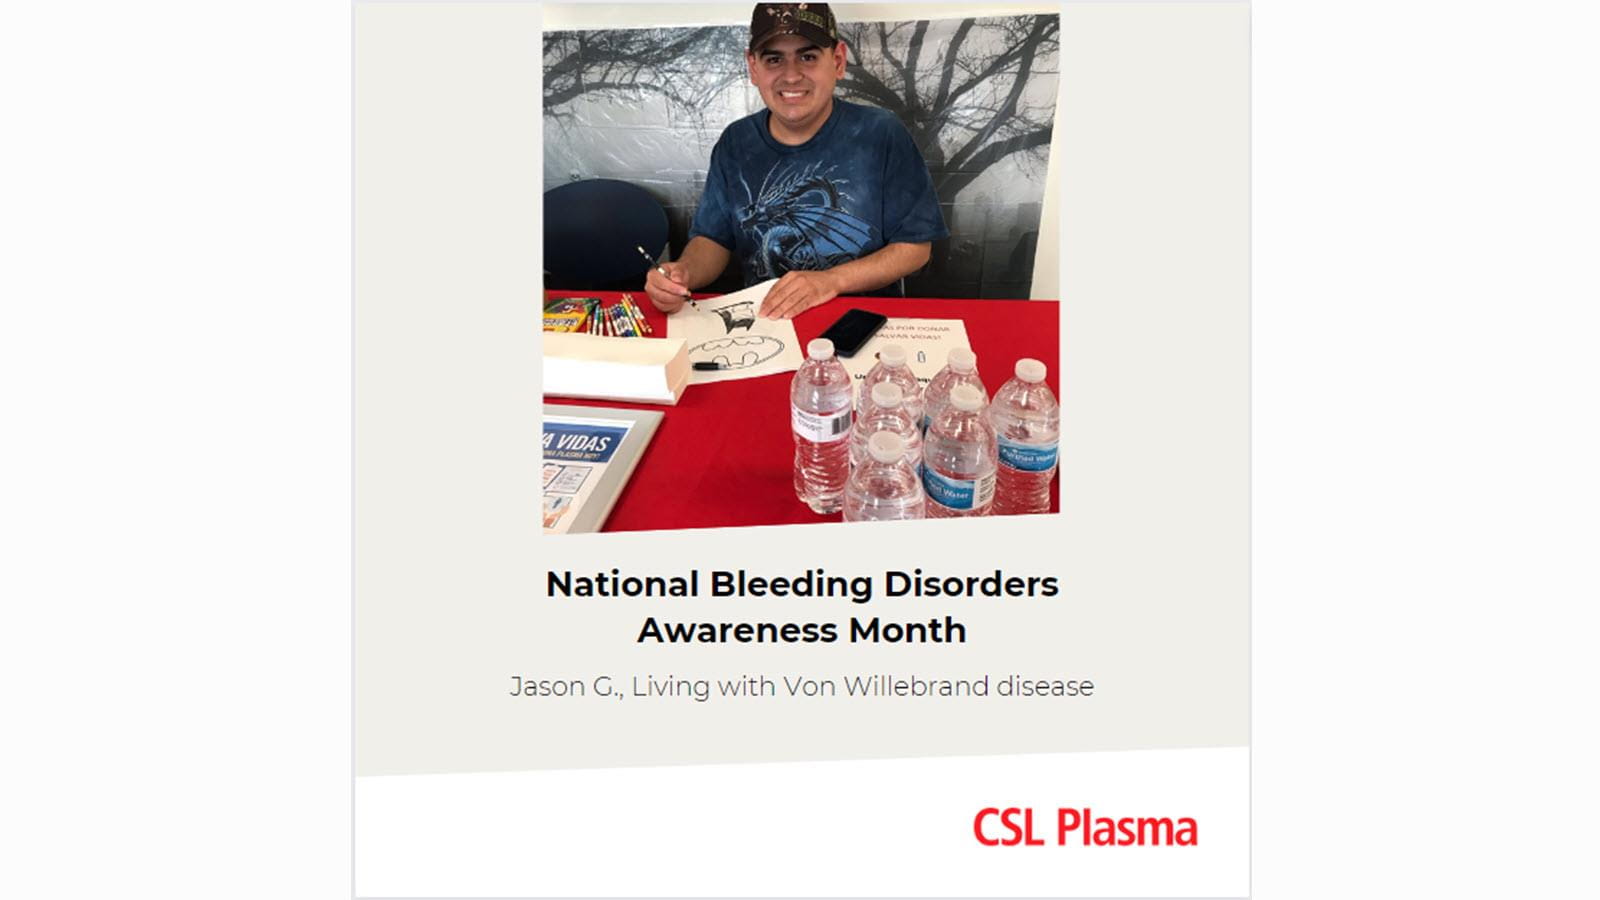 Jason, who has von Willebrand Disease, sits at a table with art supplies.